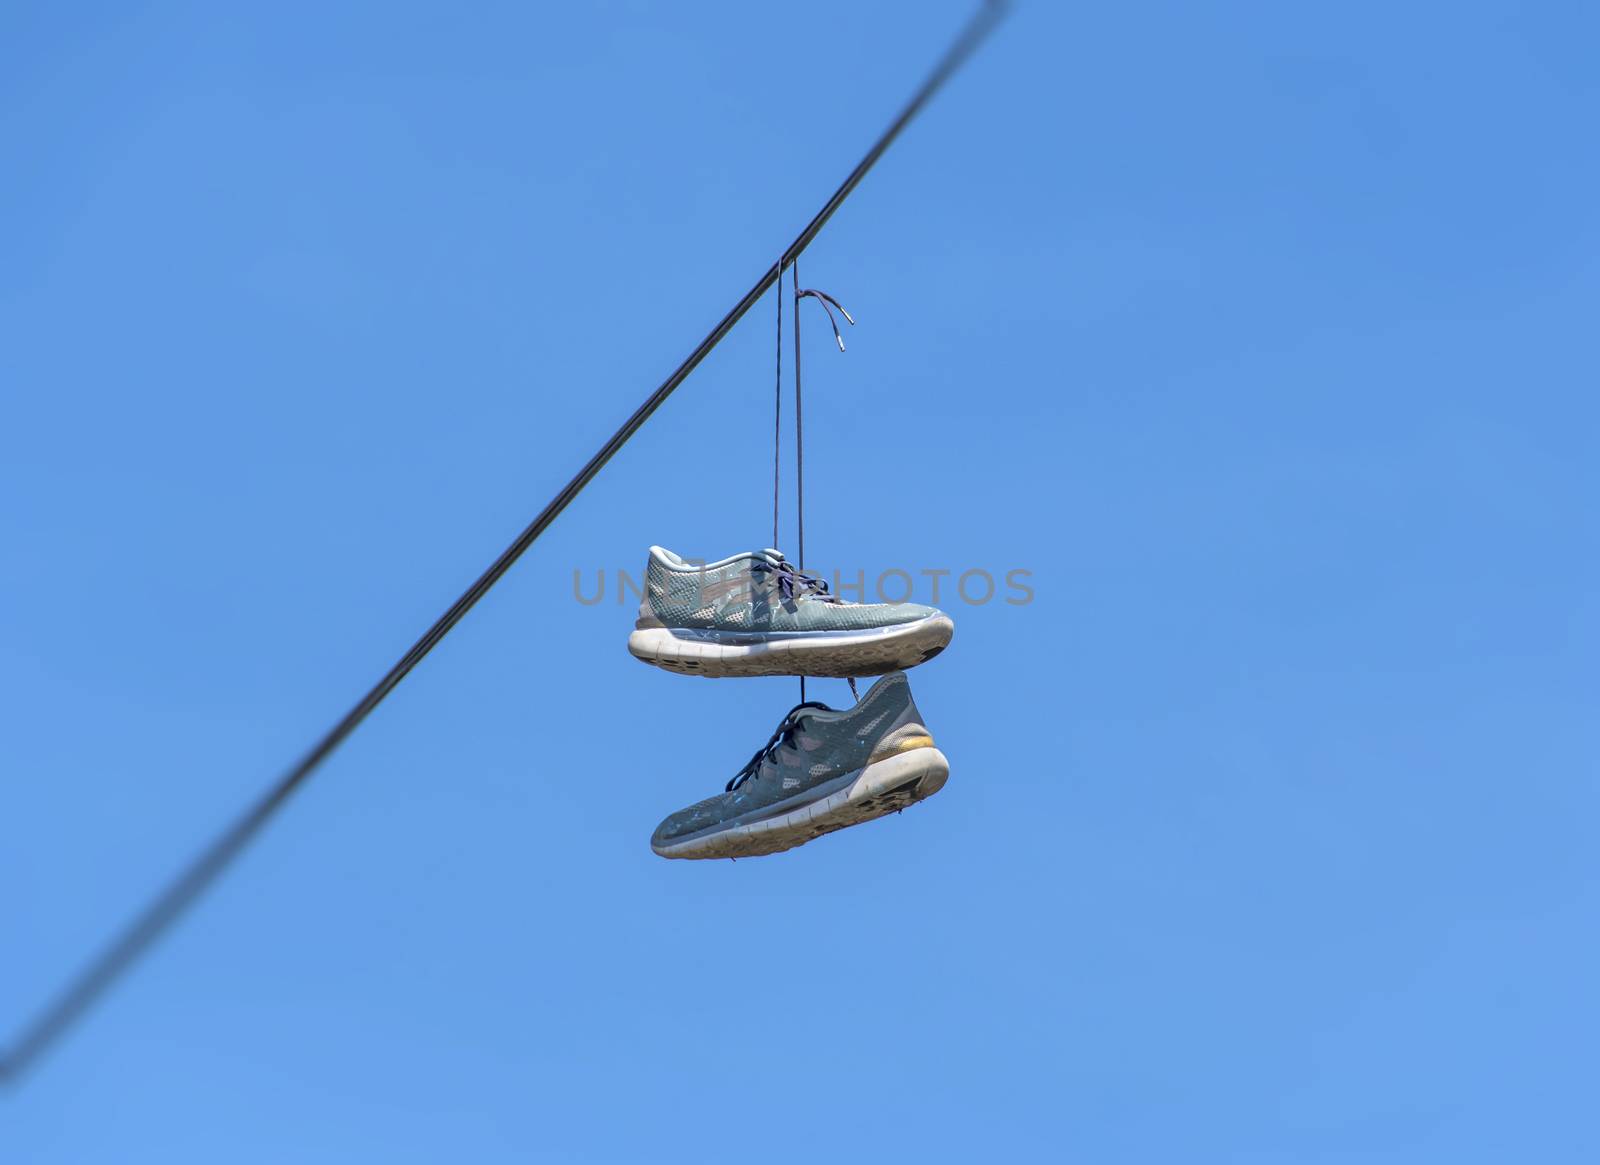 Shoes dangling on a cable over the street have many explanations, from celebrating one's birthday or wedding and making fun of drunk friends, to marking a location of drug dealers and bullying.